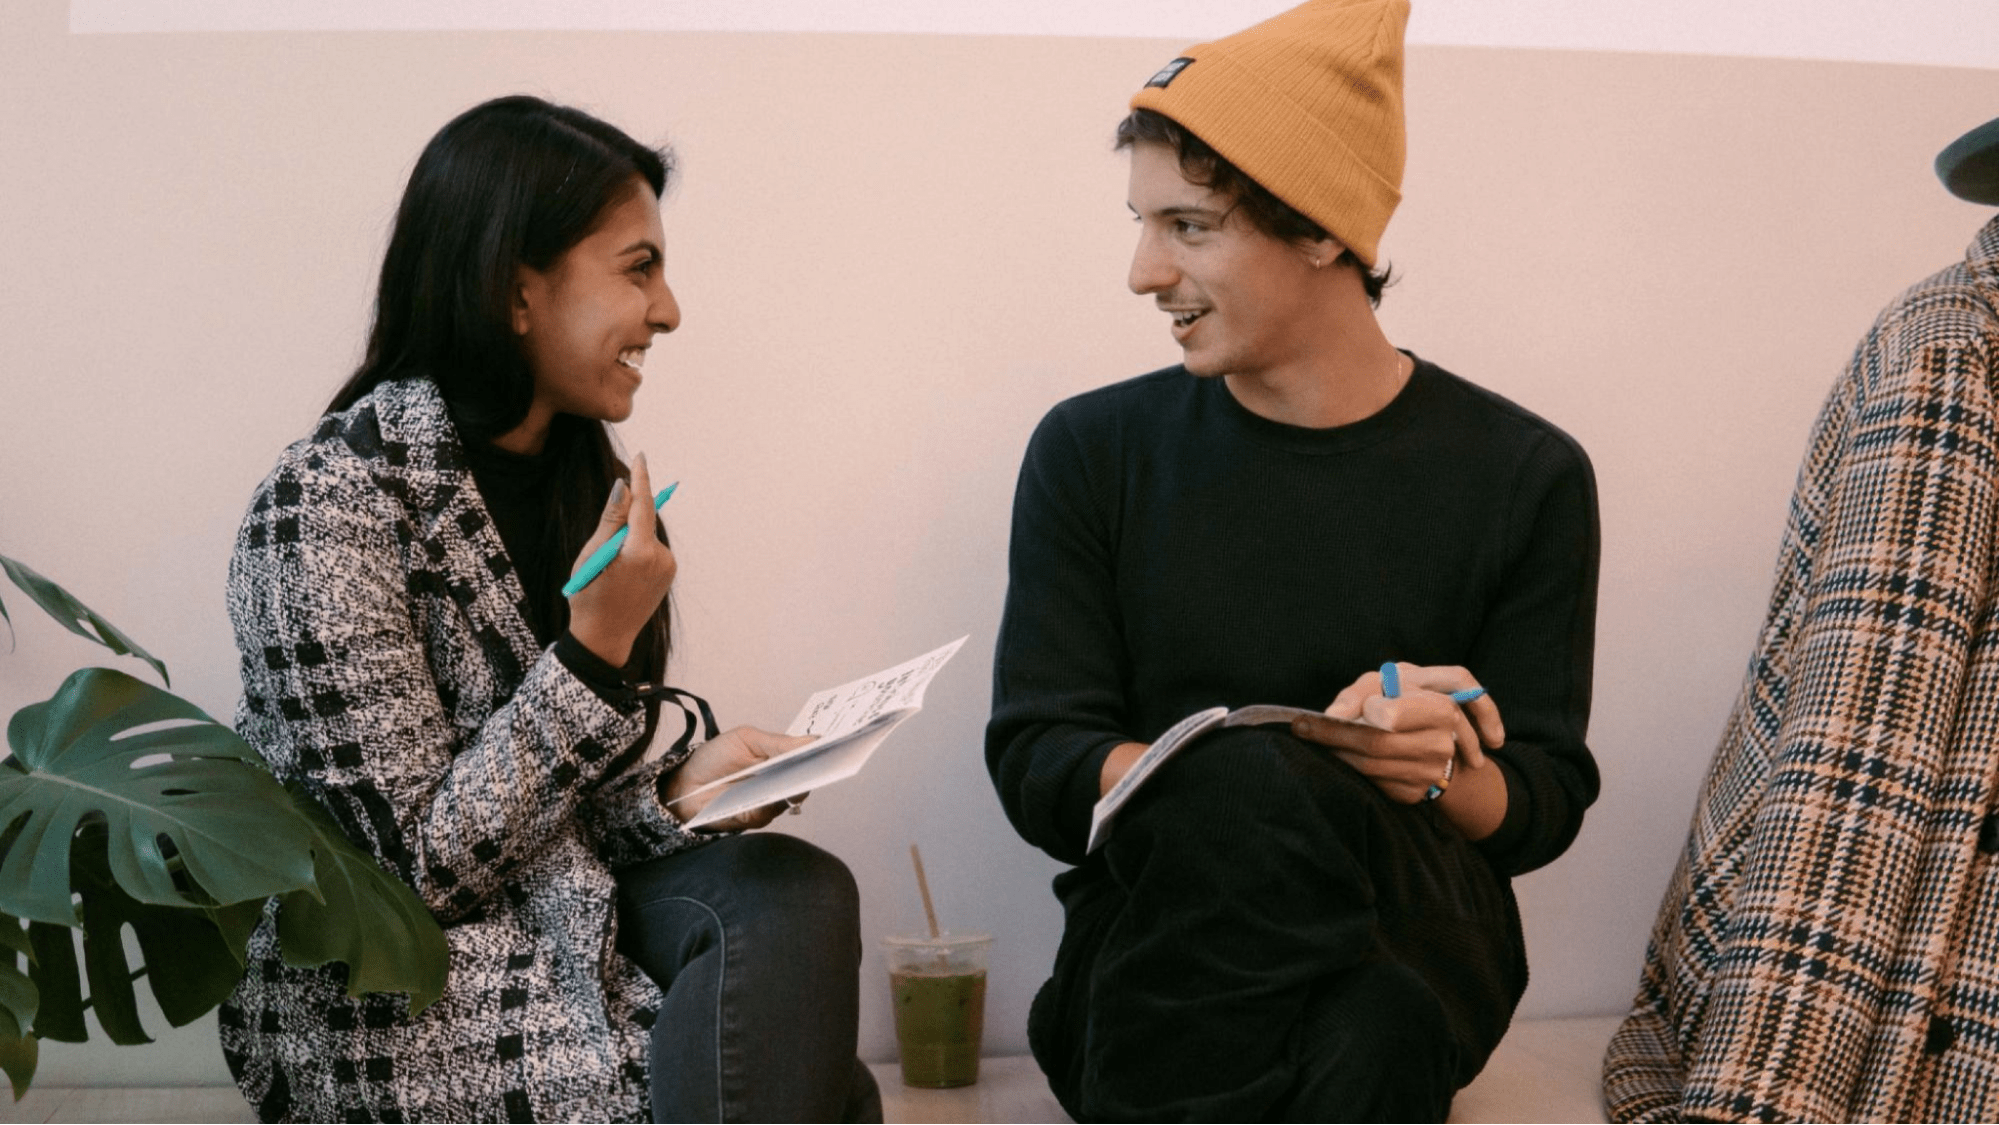 Man and woman sit laughing while writing in notebooks at an event